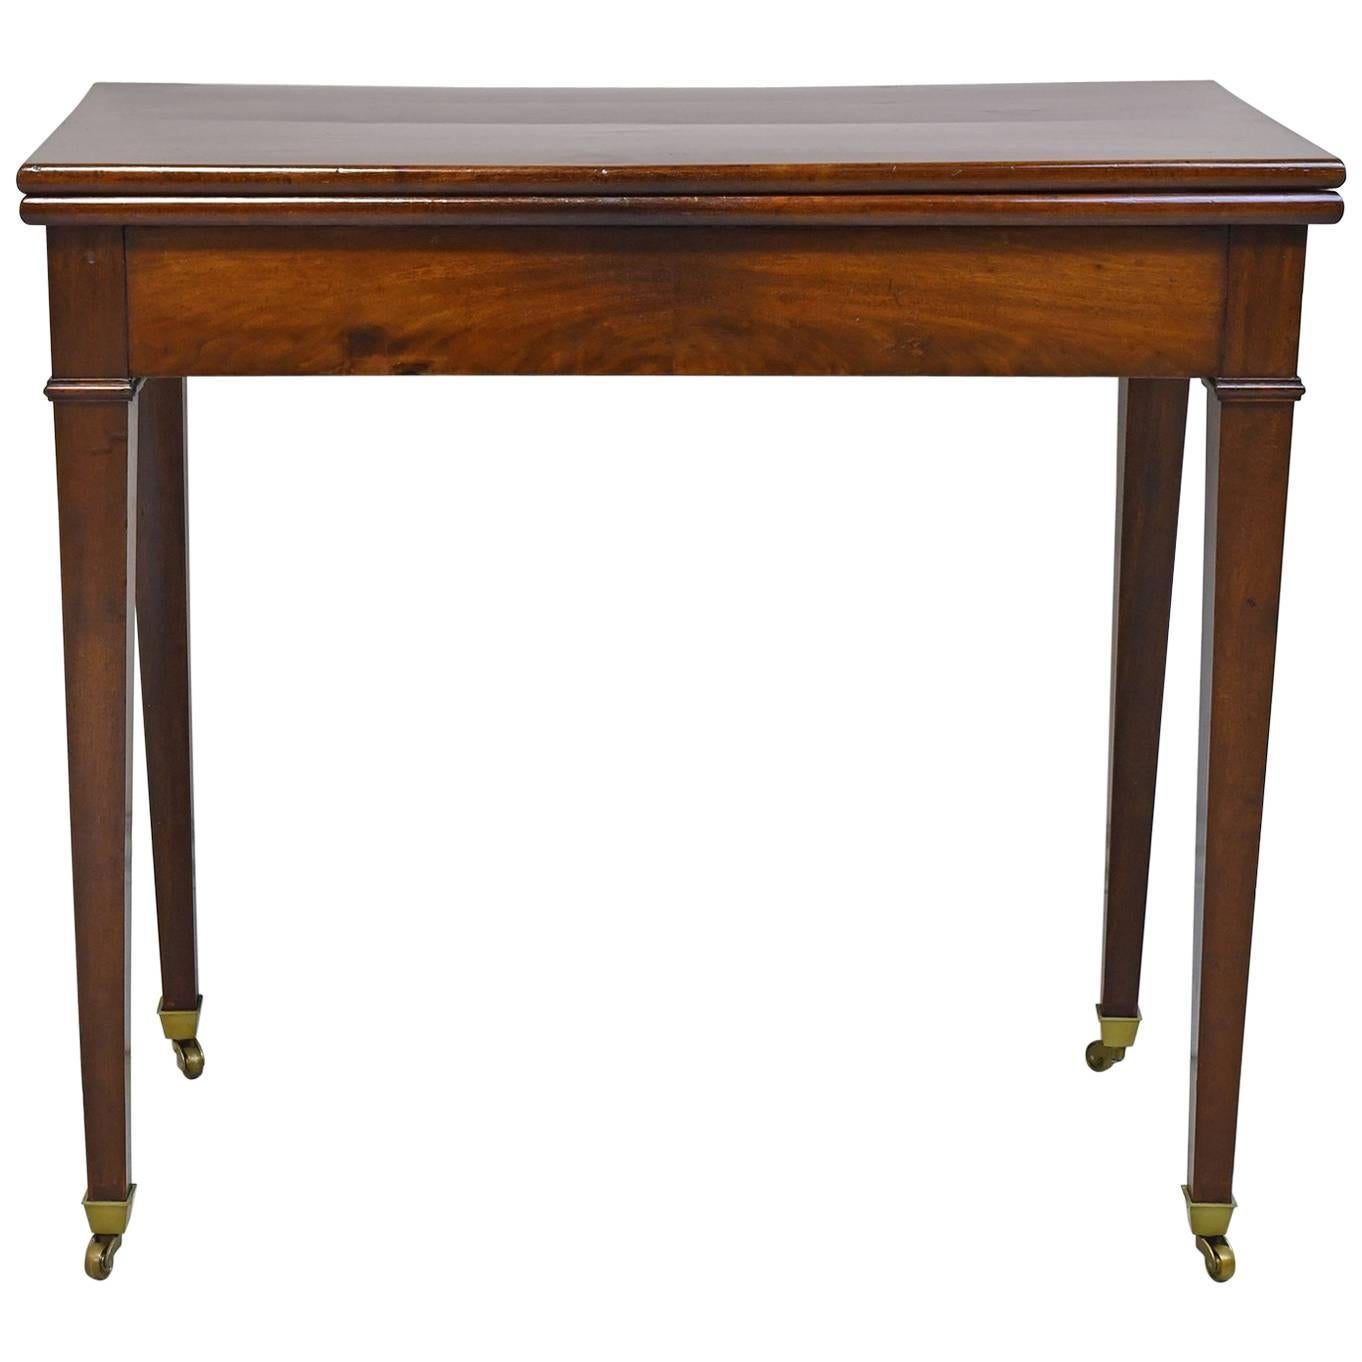 18th Century French Directoire Card Table in Mahogany